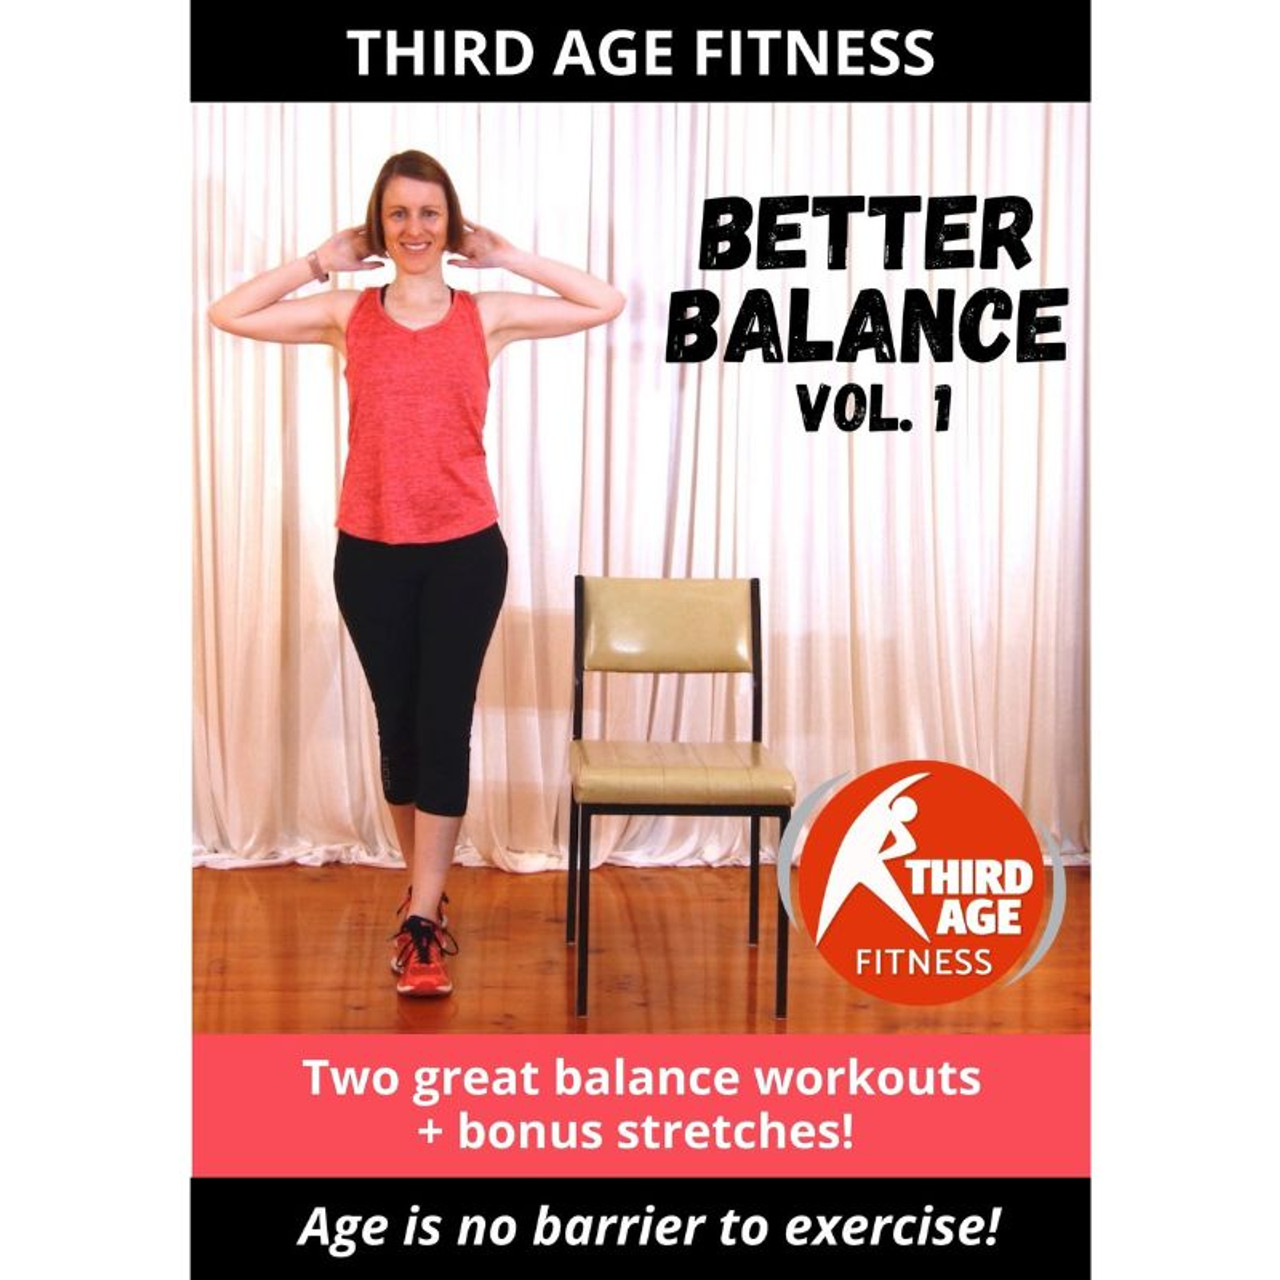 Better Balance Vol. 1 - Balance exercise DVD for older adults and seniors